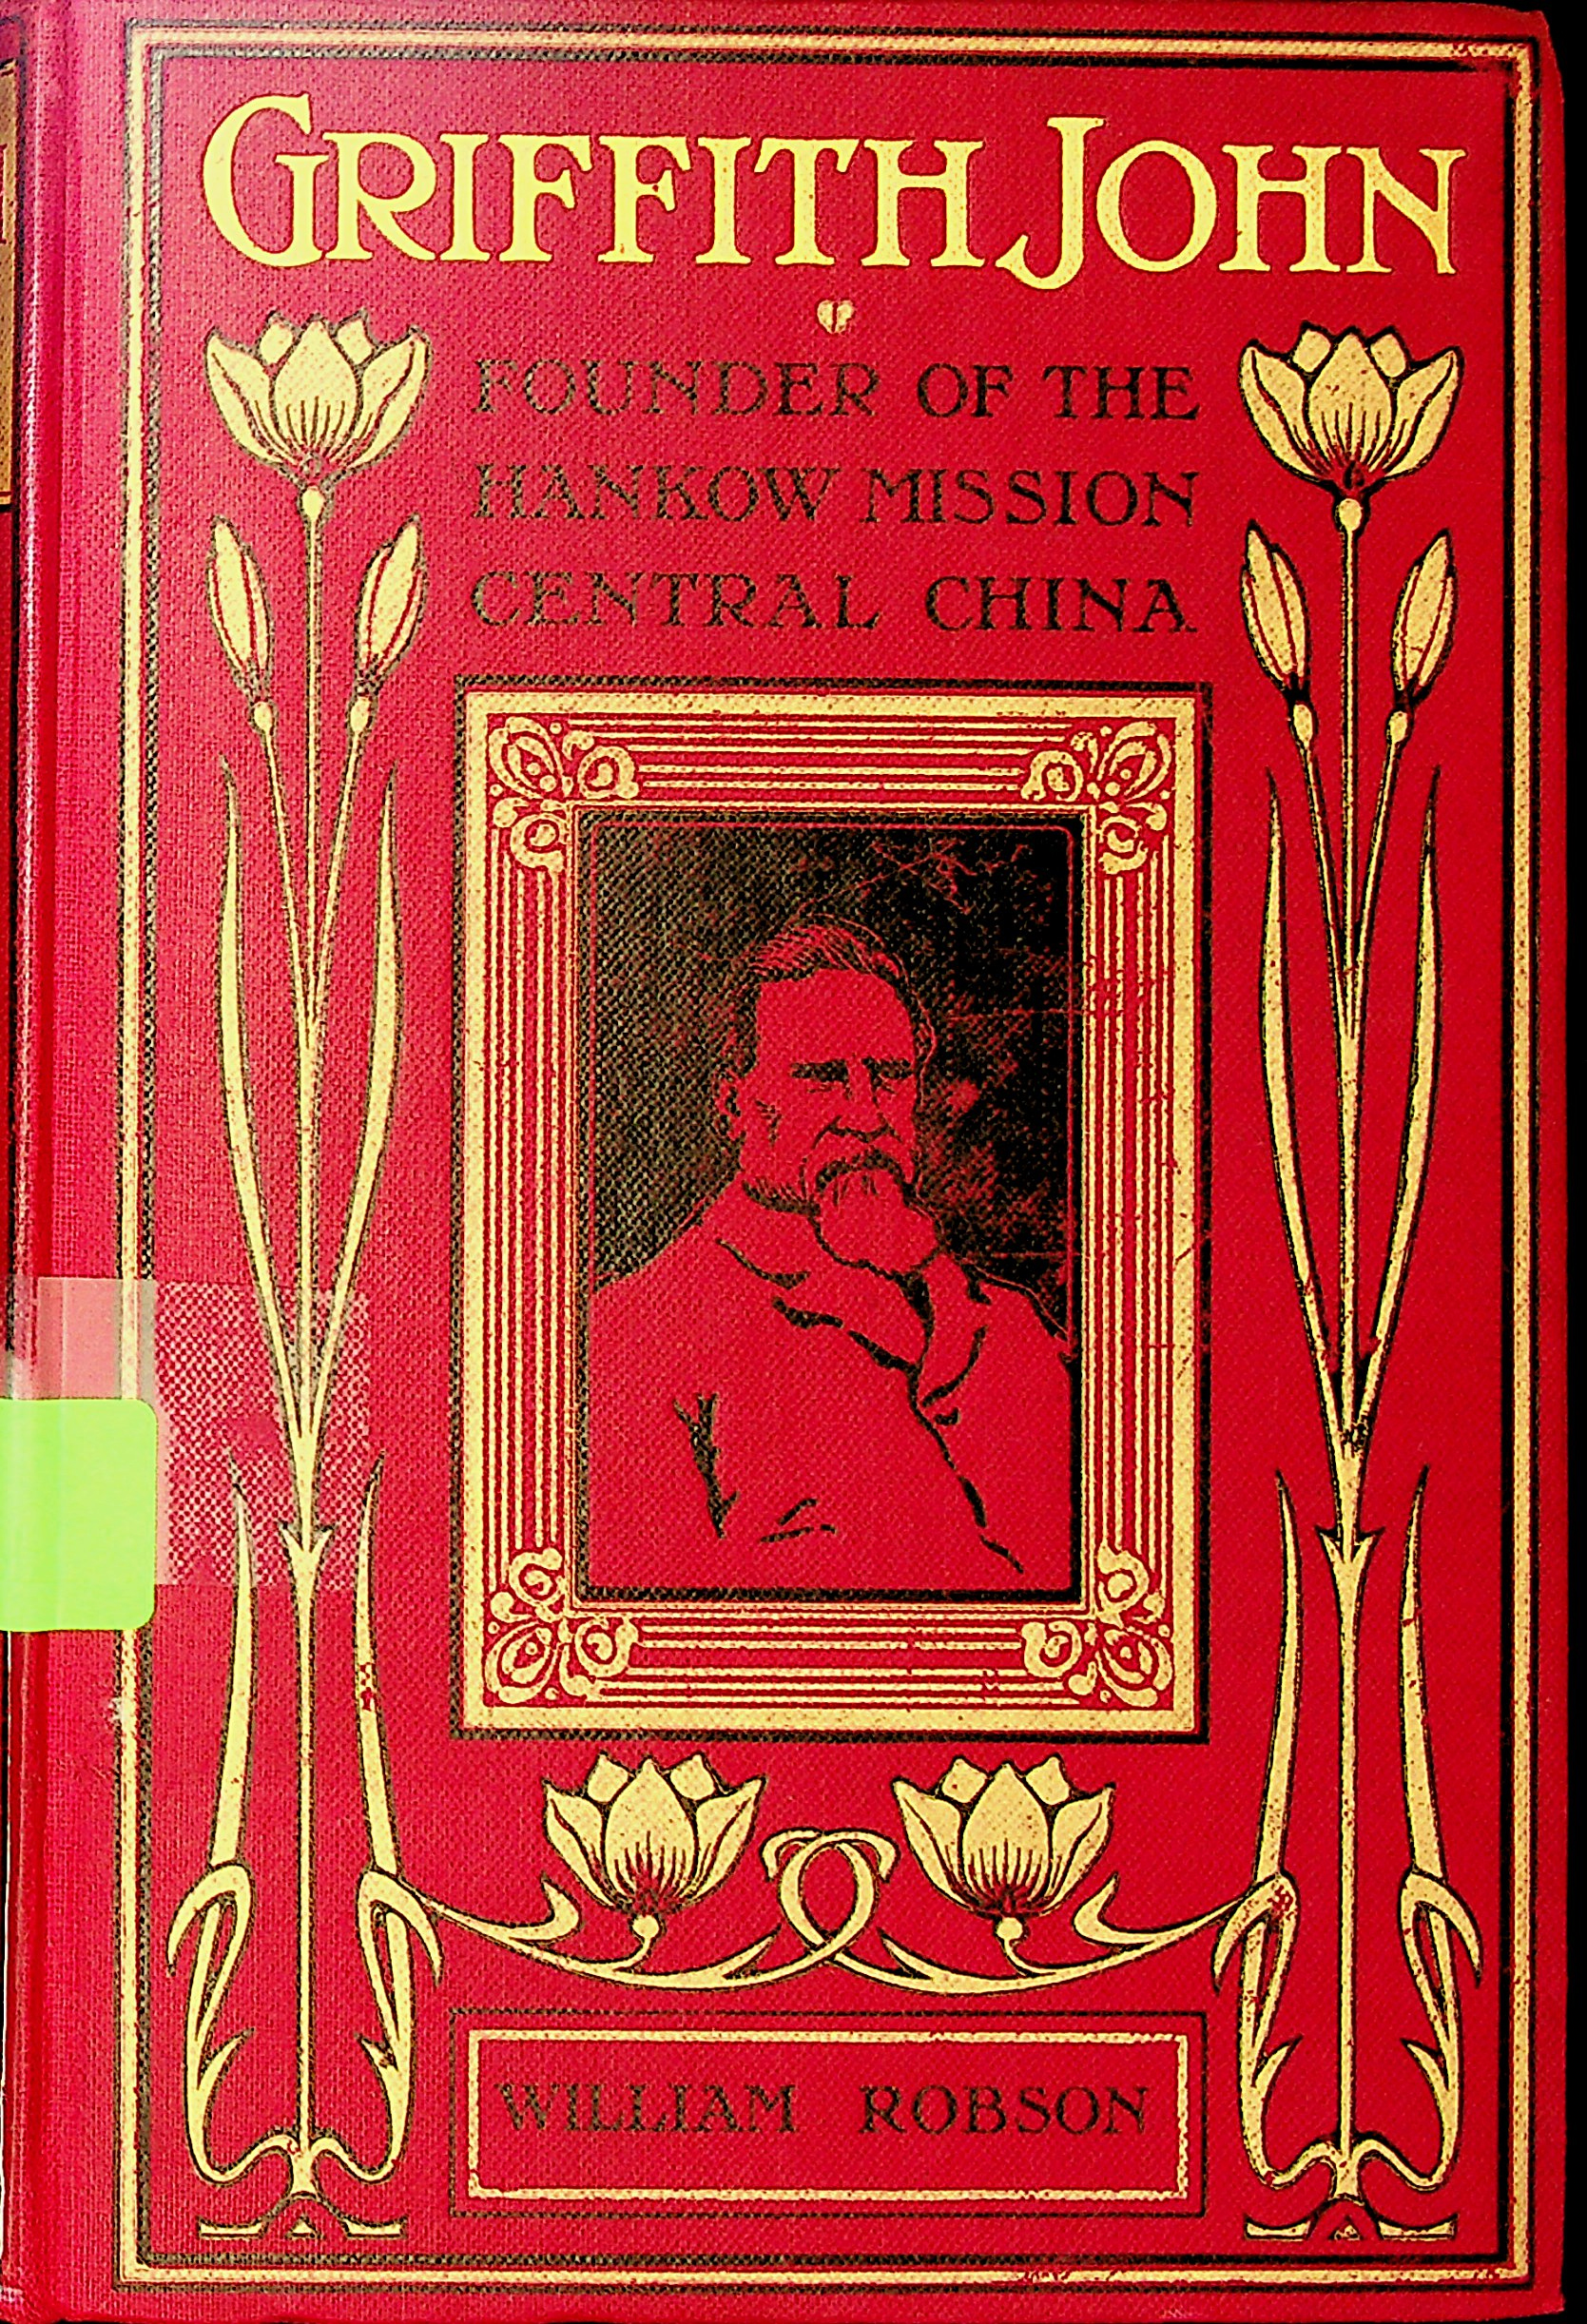 Griffith John : founder of the Hankow Mission, central China 